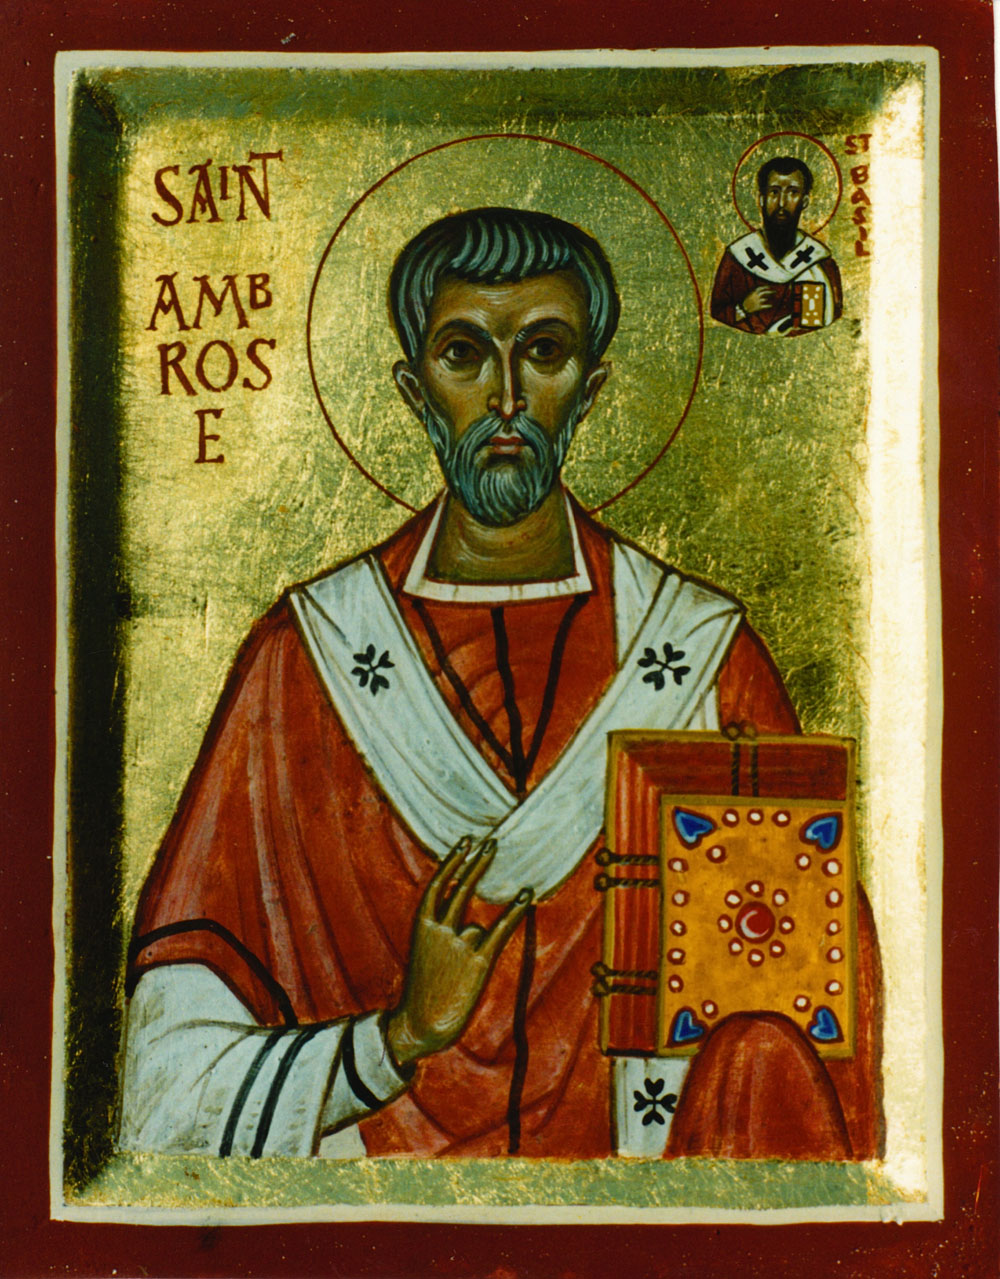 December 7, 2014 </br>26th Sunday after Pentecost, Tone 1 </br>Our Holy Father Ambrose, Bishop of Milan